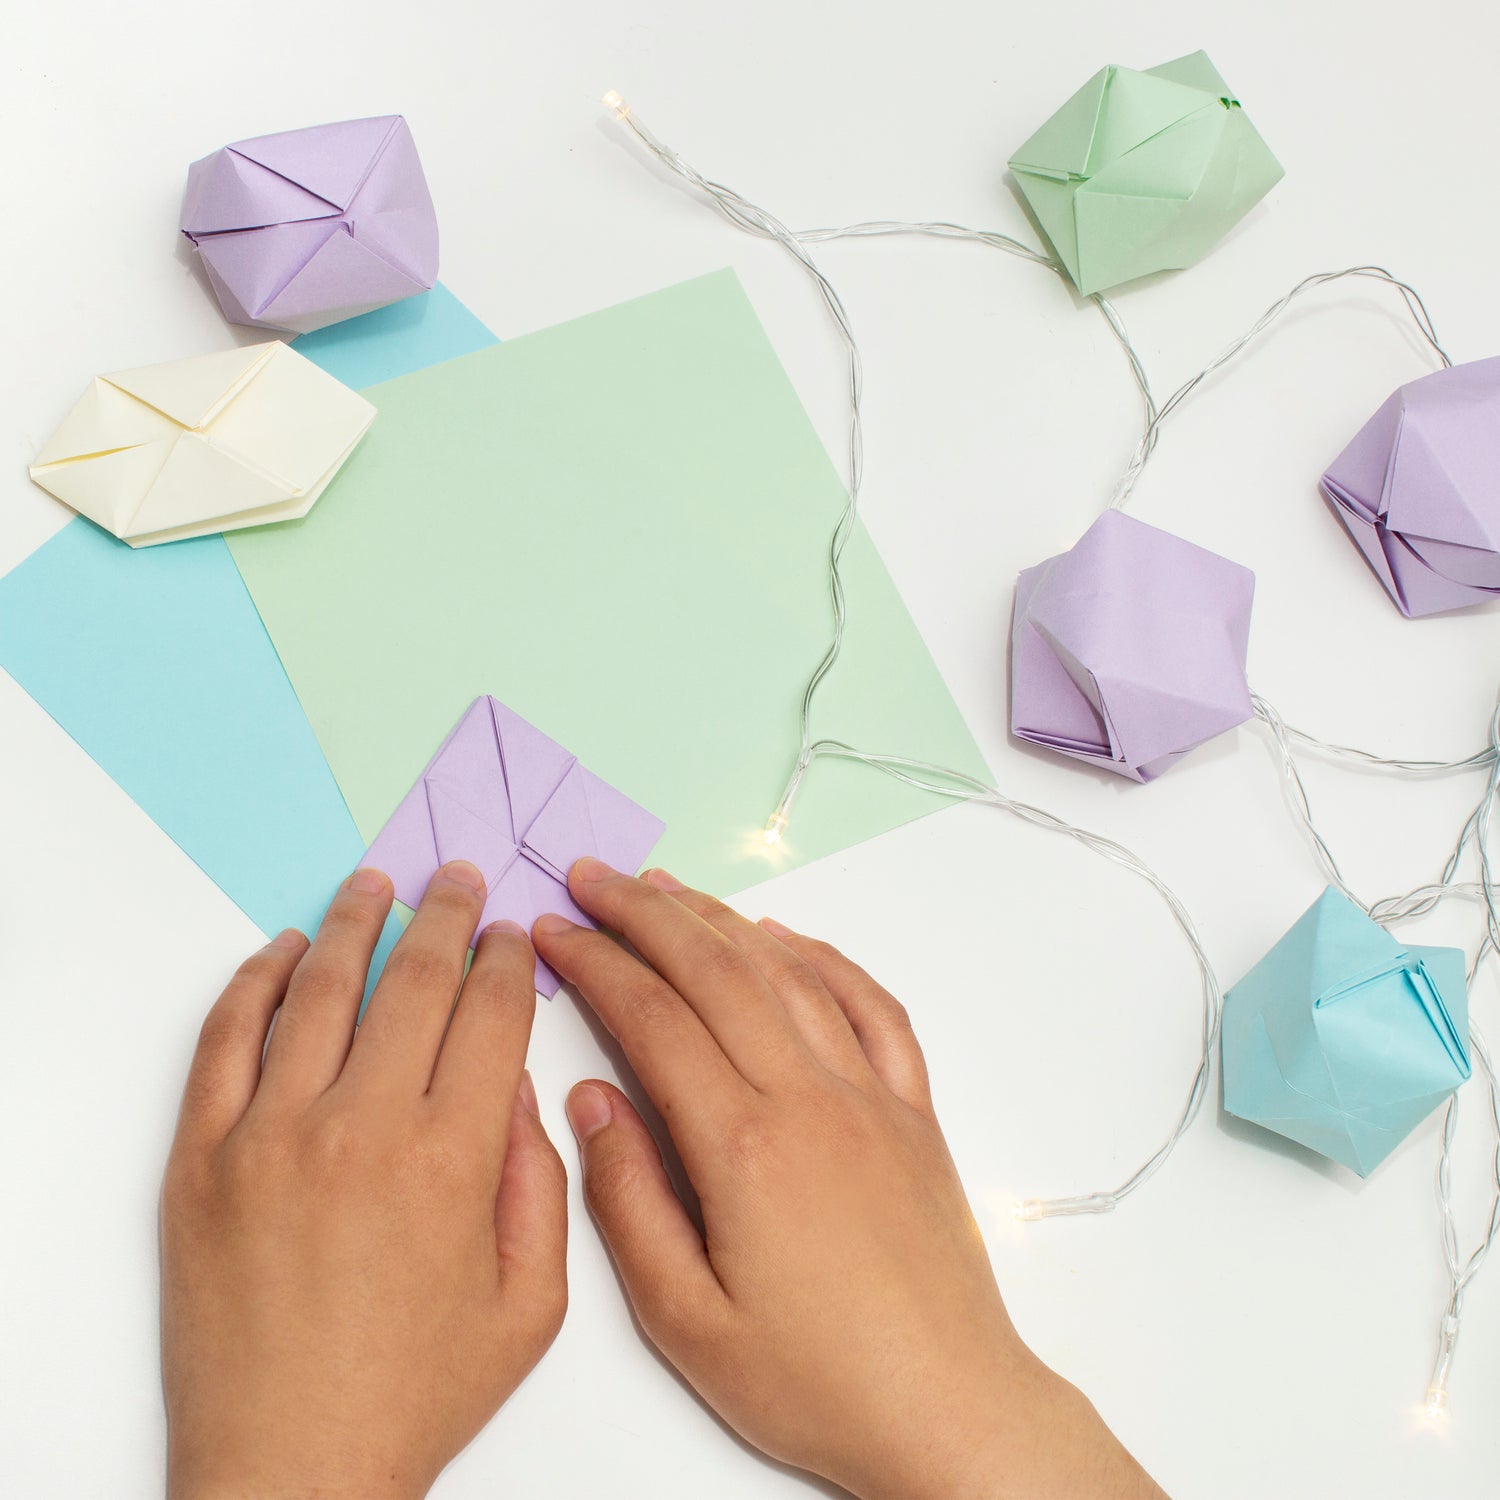 Crafter's Make Your Own Origami String Lights